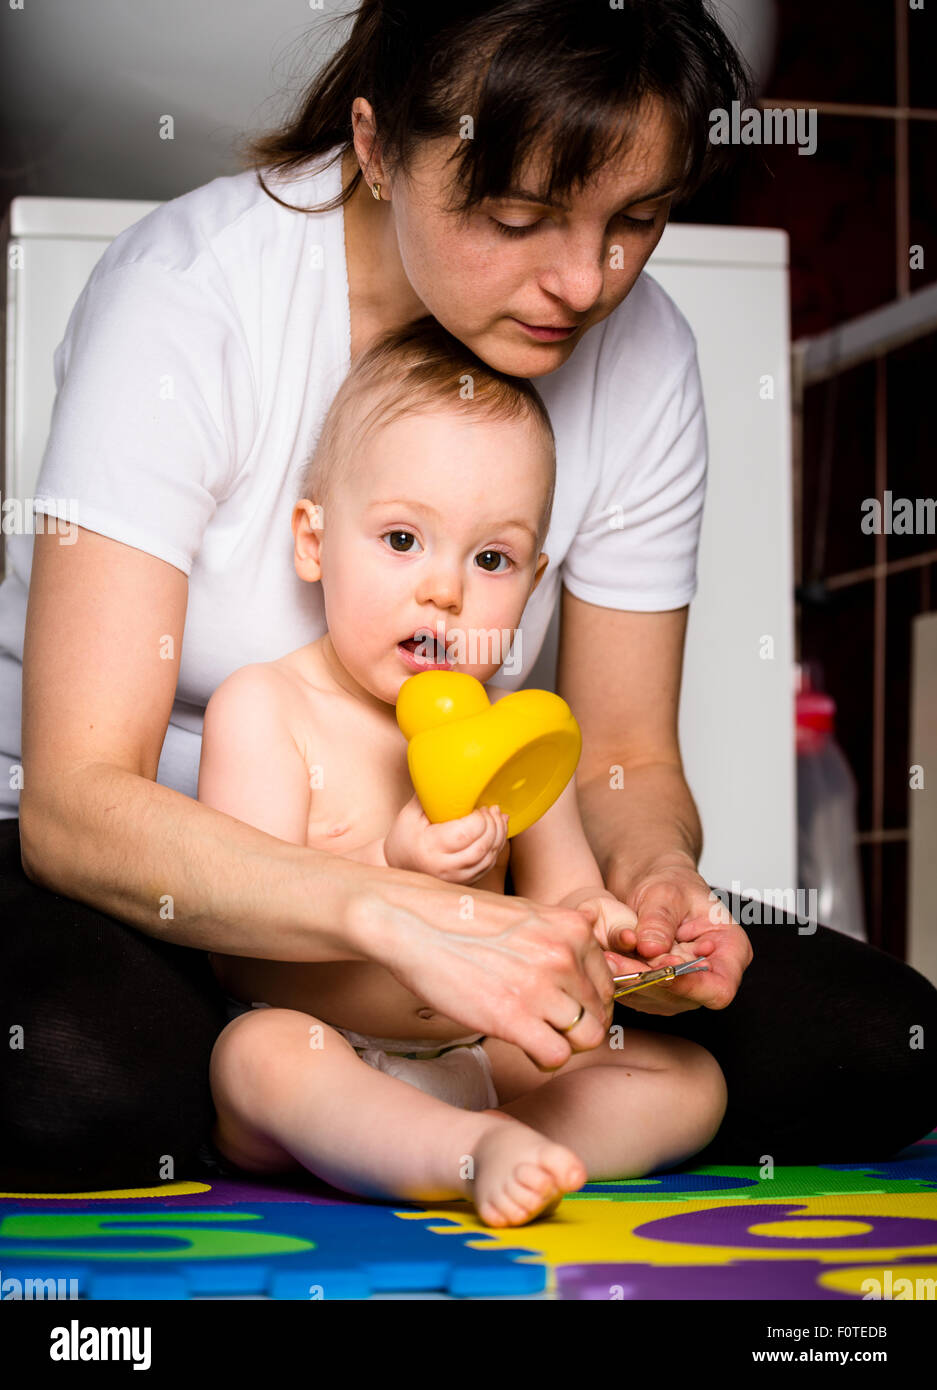 Mother cutting fingernails of her child while baby is playing with toys Stock Photo